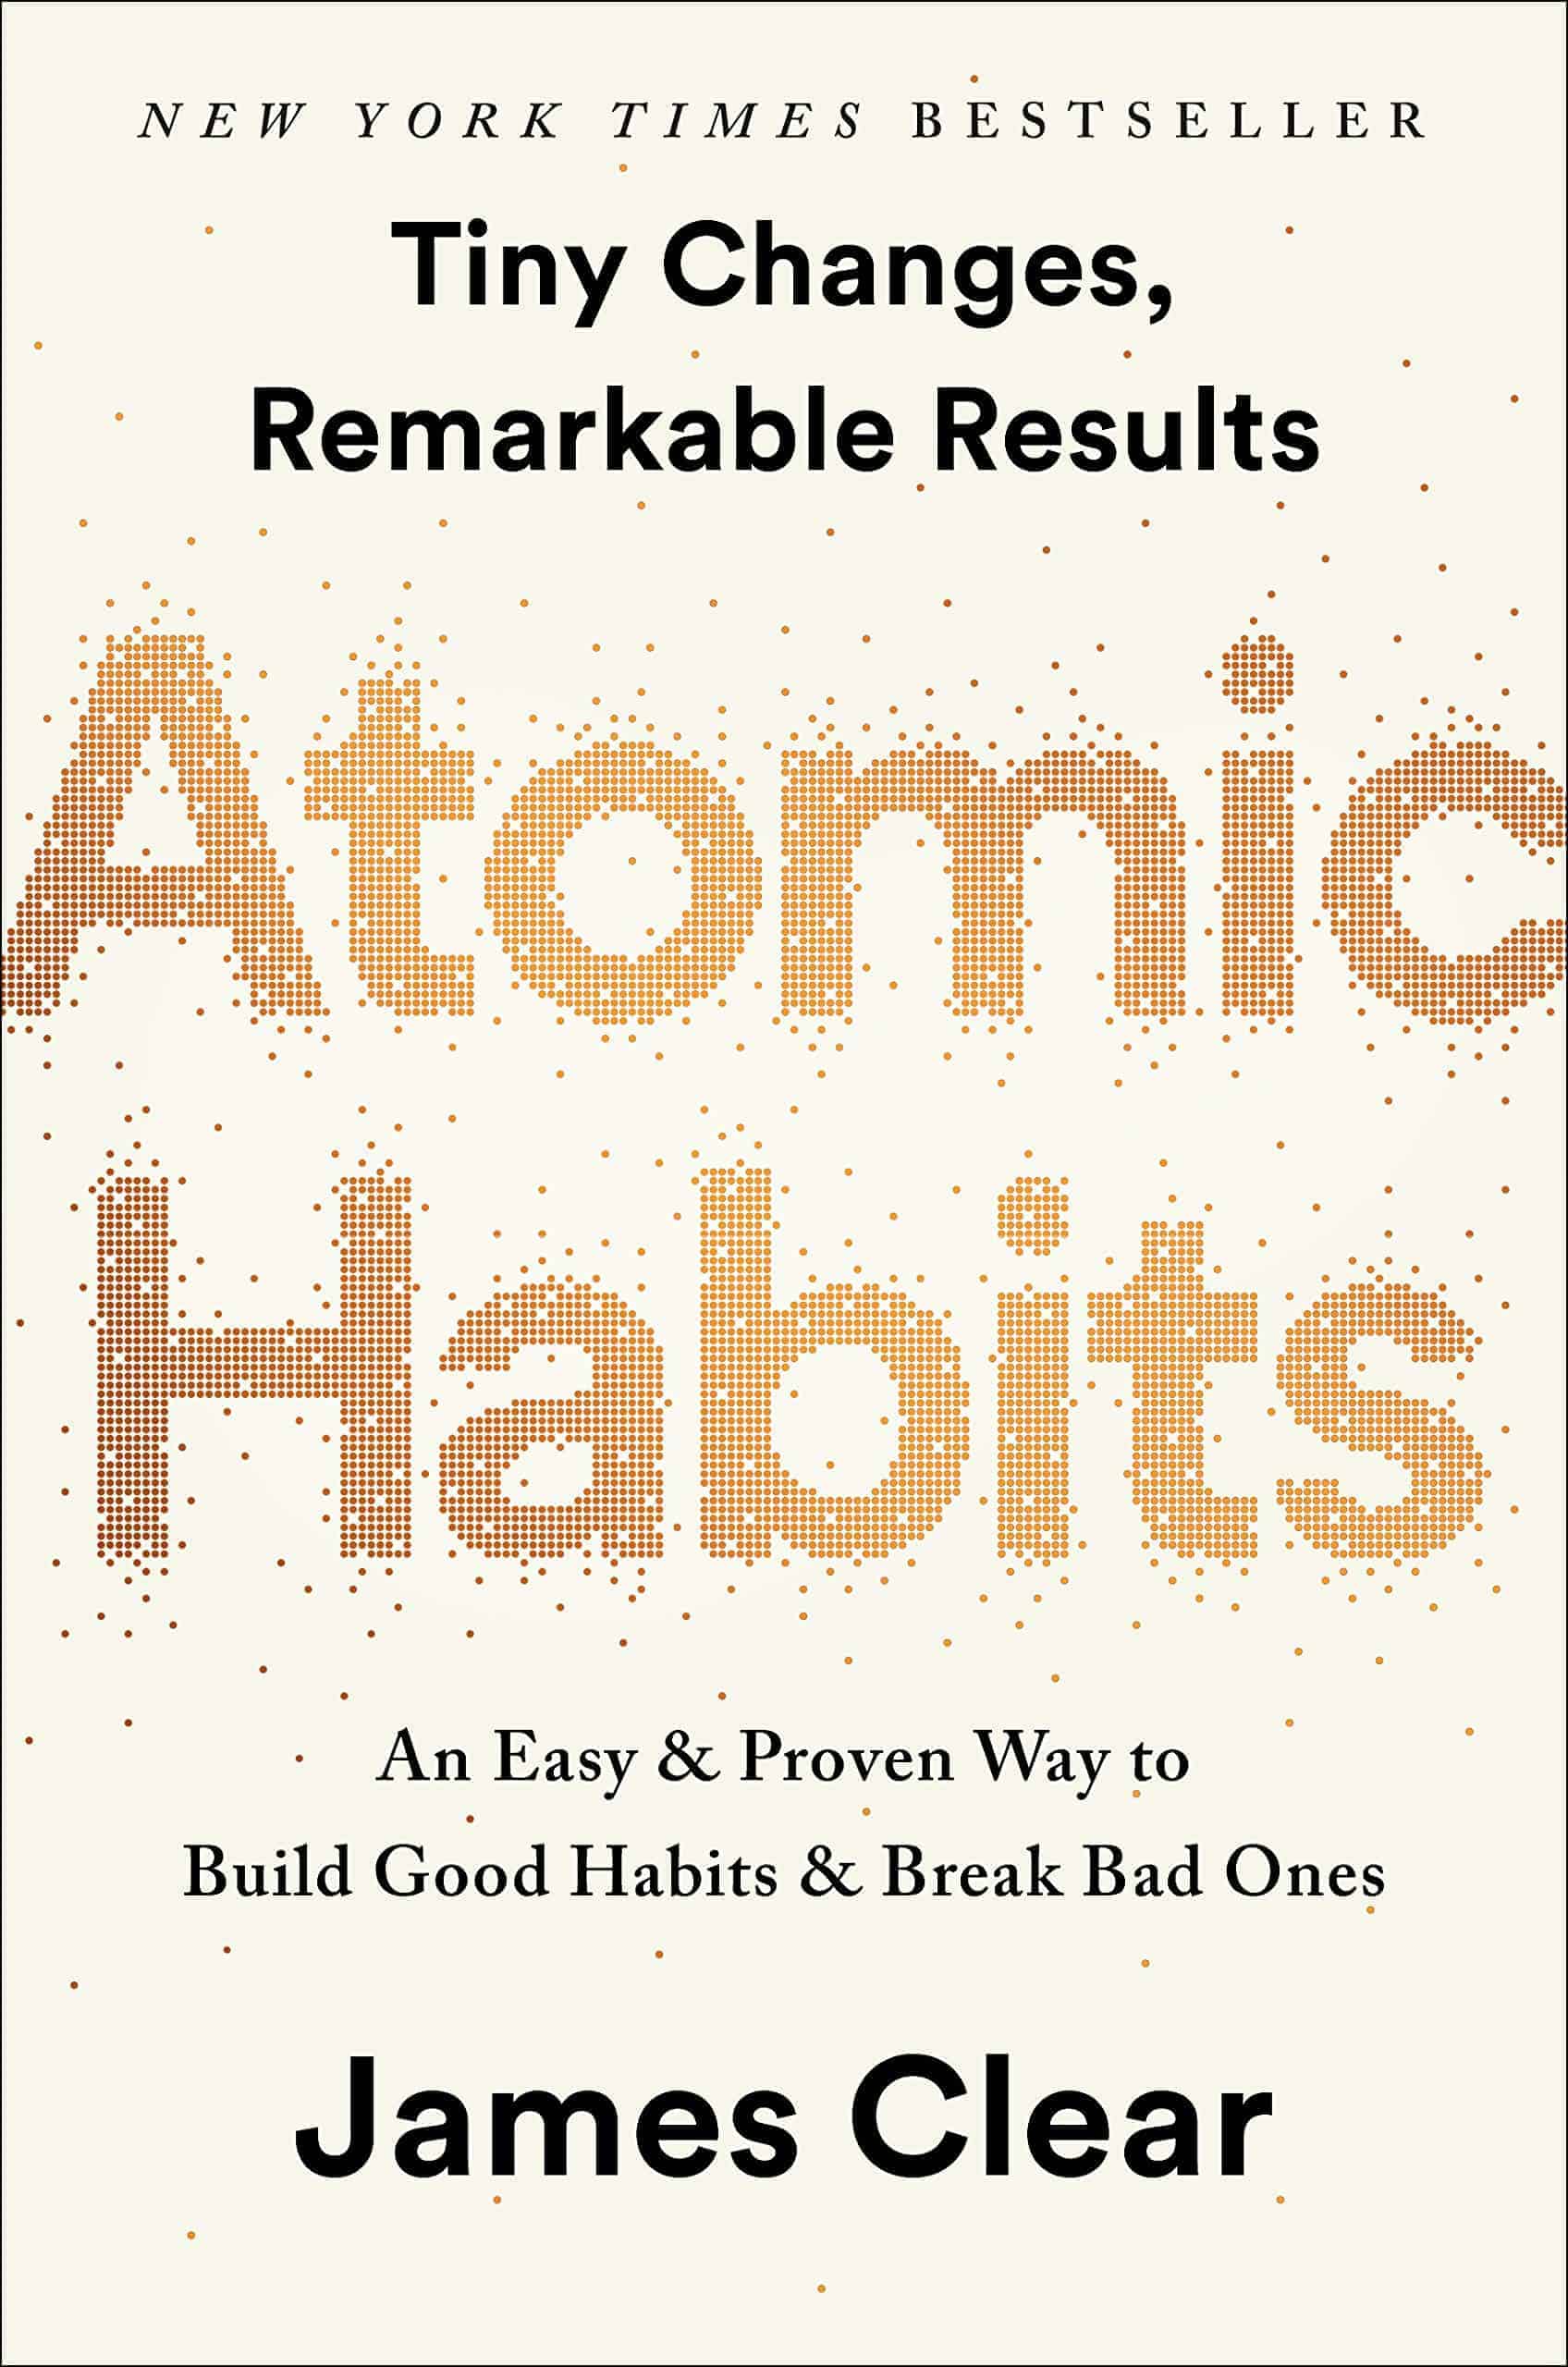 Atomic Habits by James Clear is one of the best books for new managers